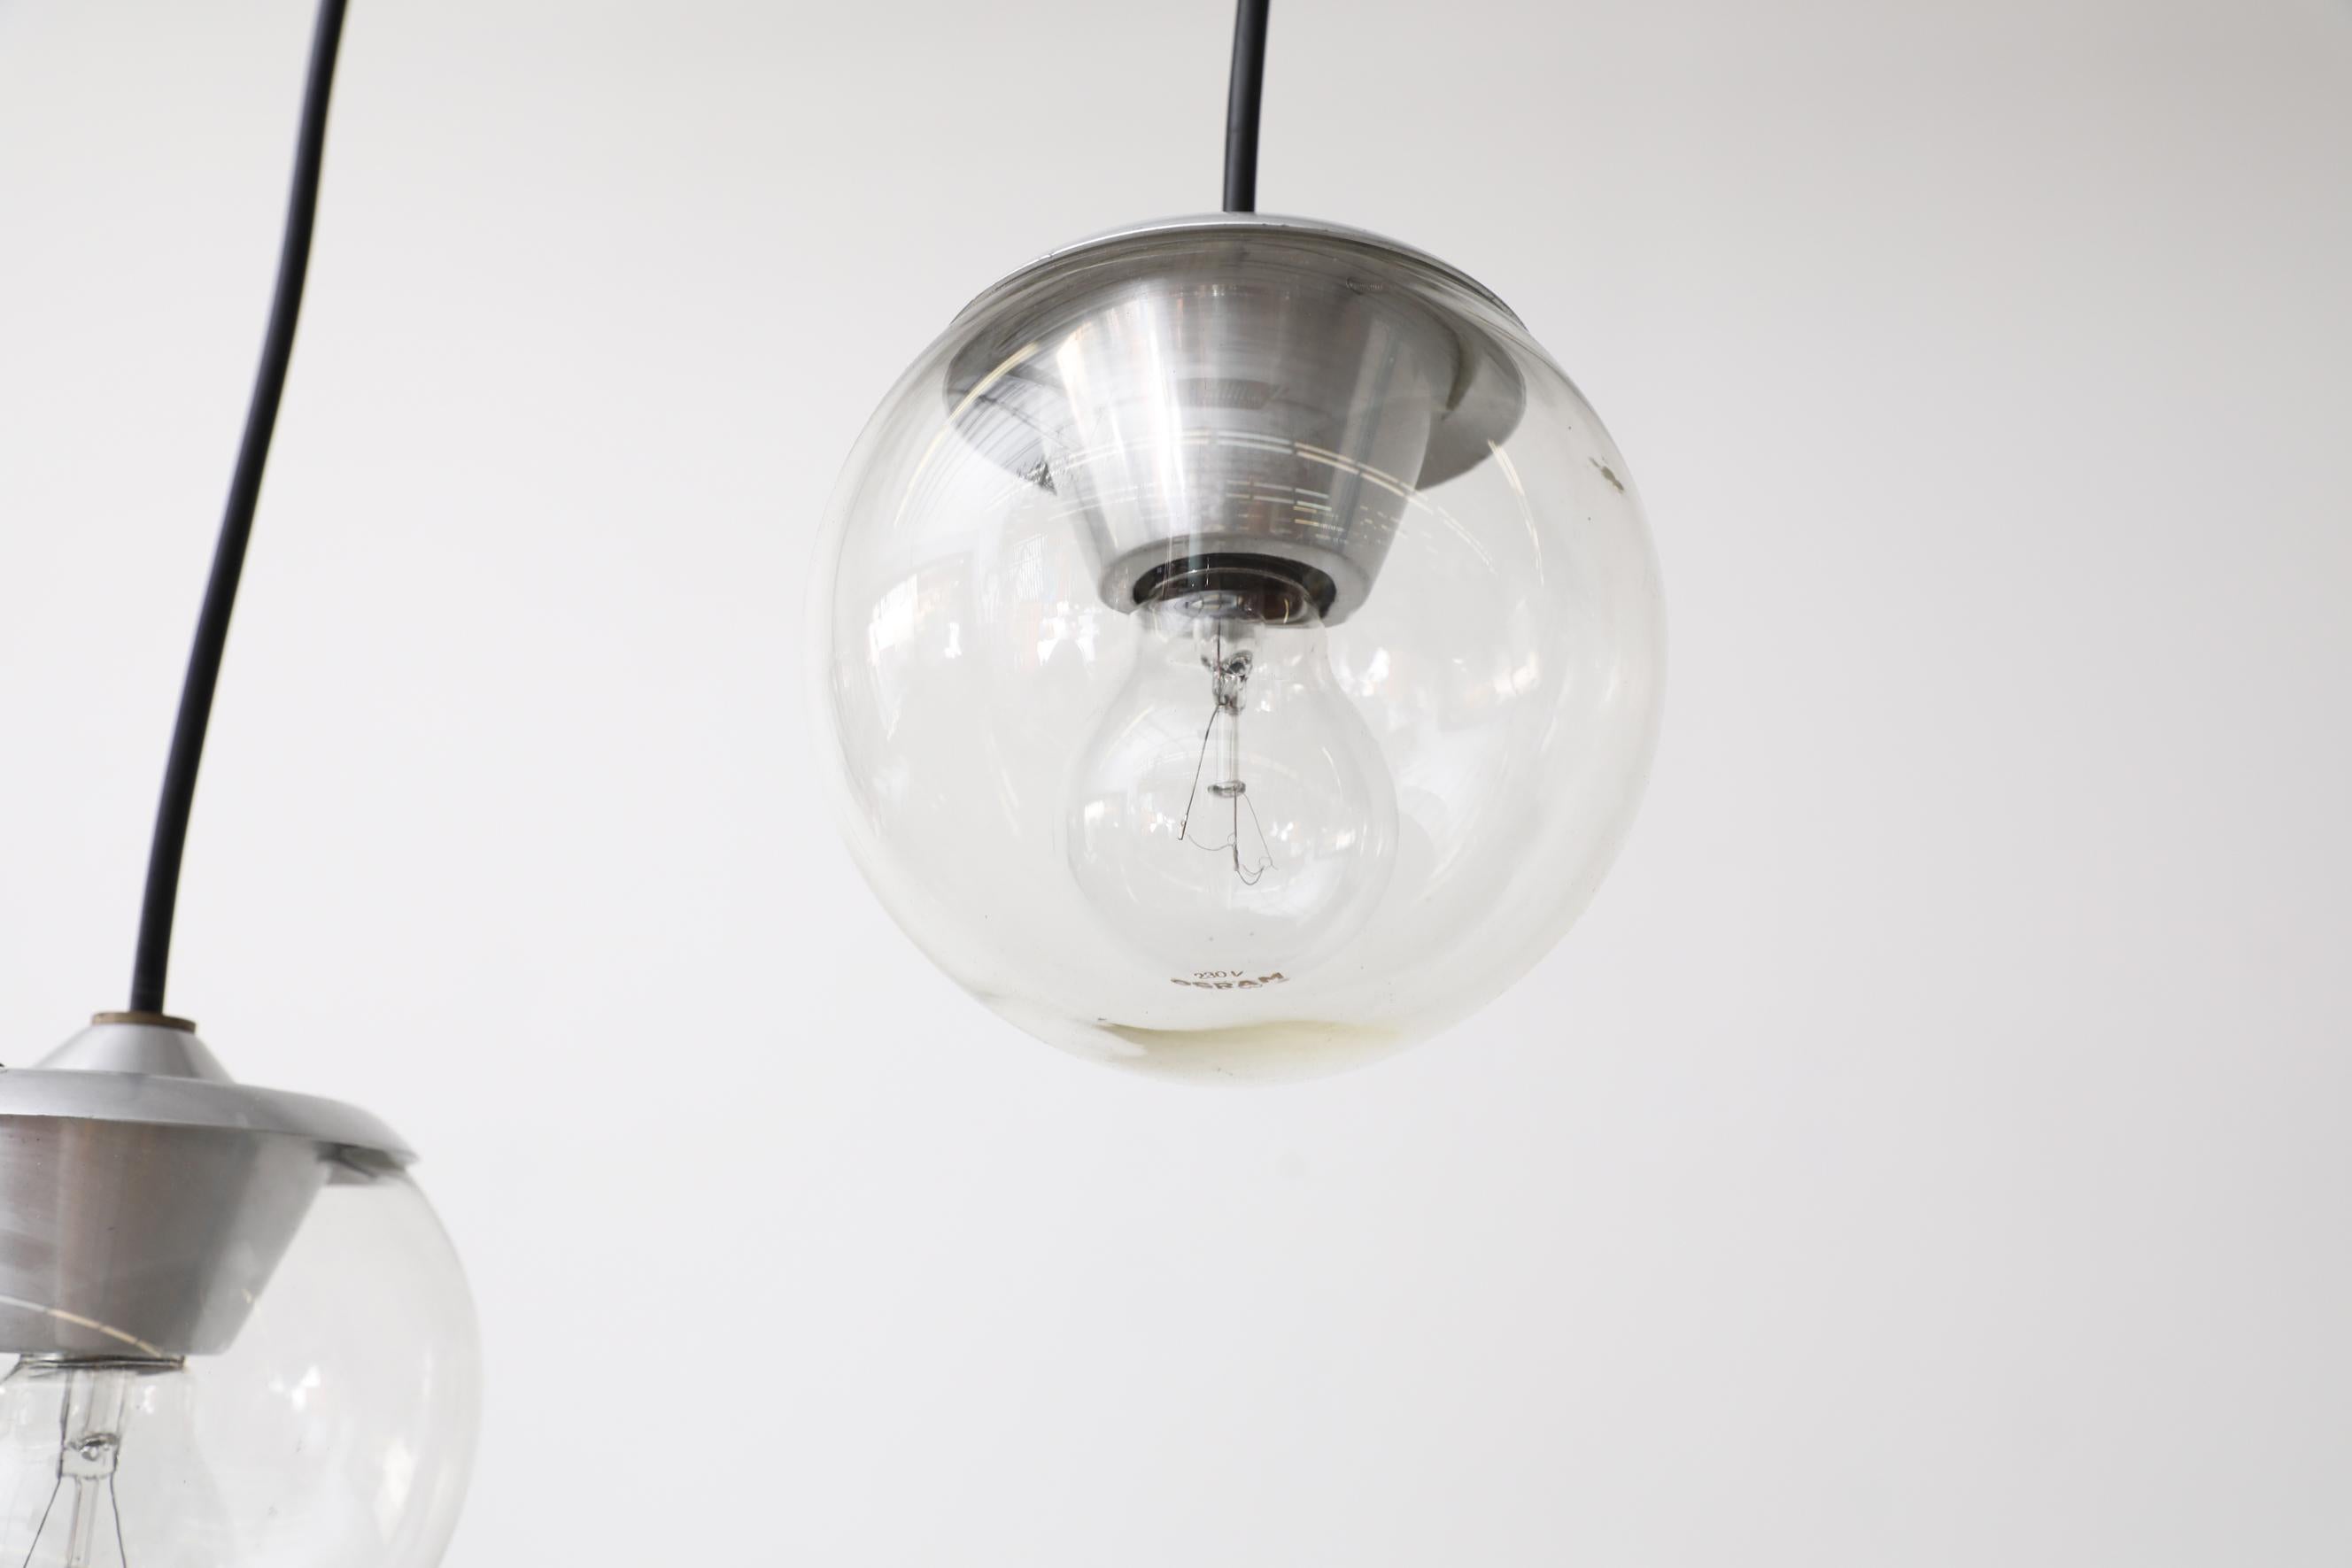 Pair of Gino Sarfatti Glass Pendant Lights Model 2095/1 by Arteluce, Italy, 1958 For Sale 5